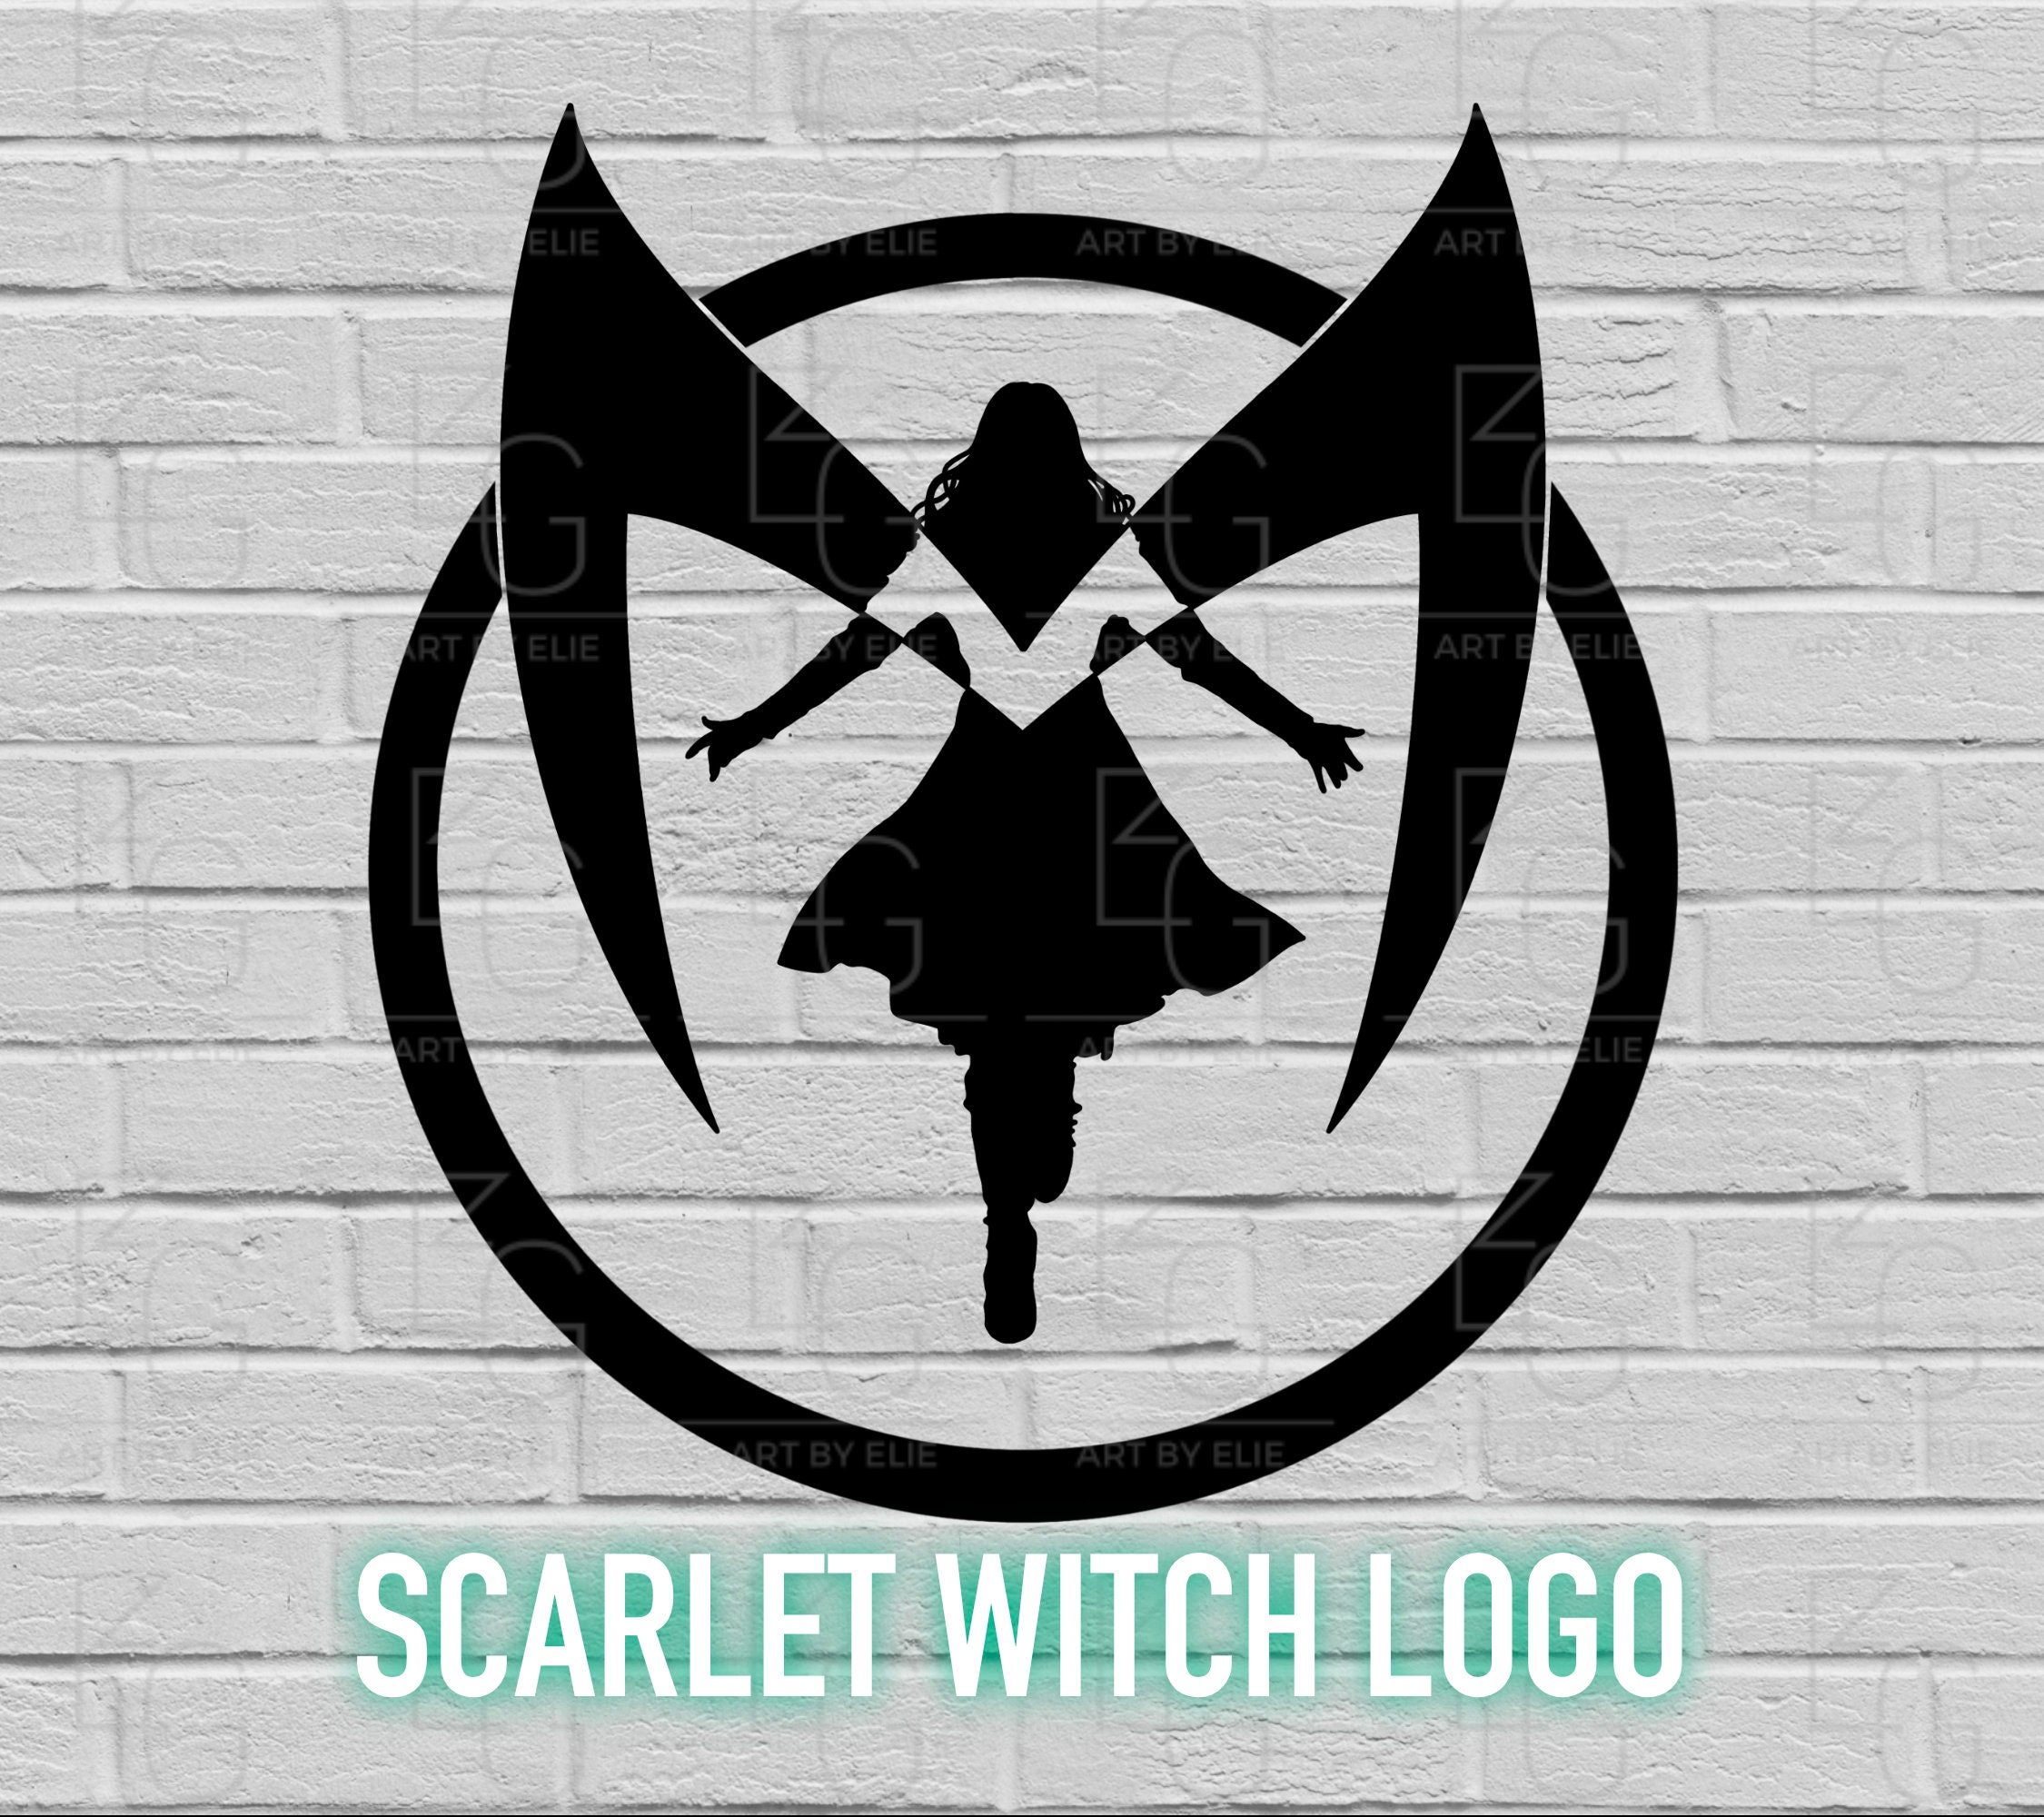 2,768 Scarlet Witch Icons - Free in SVG, PNG, ICO - IconScout